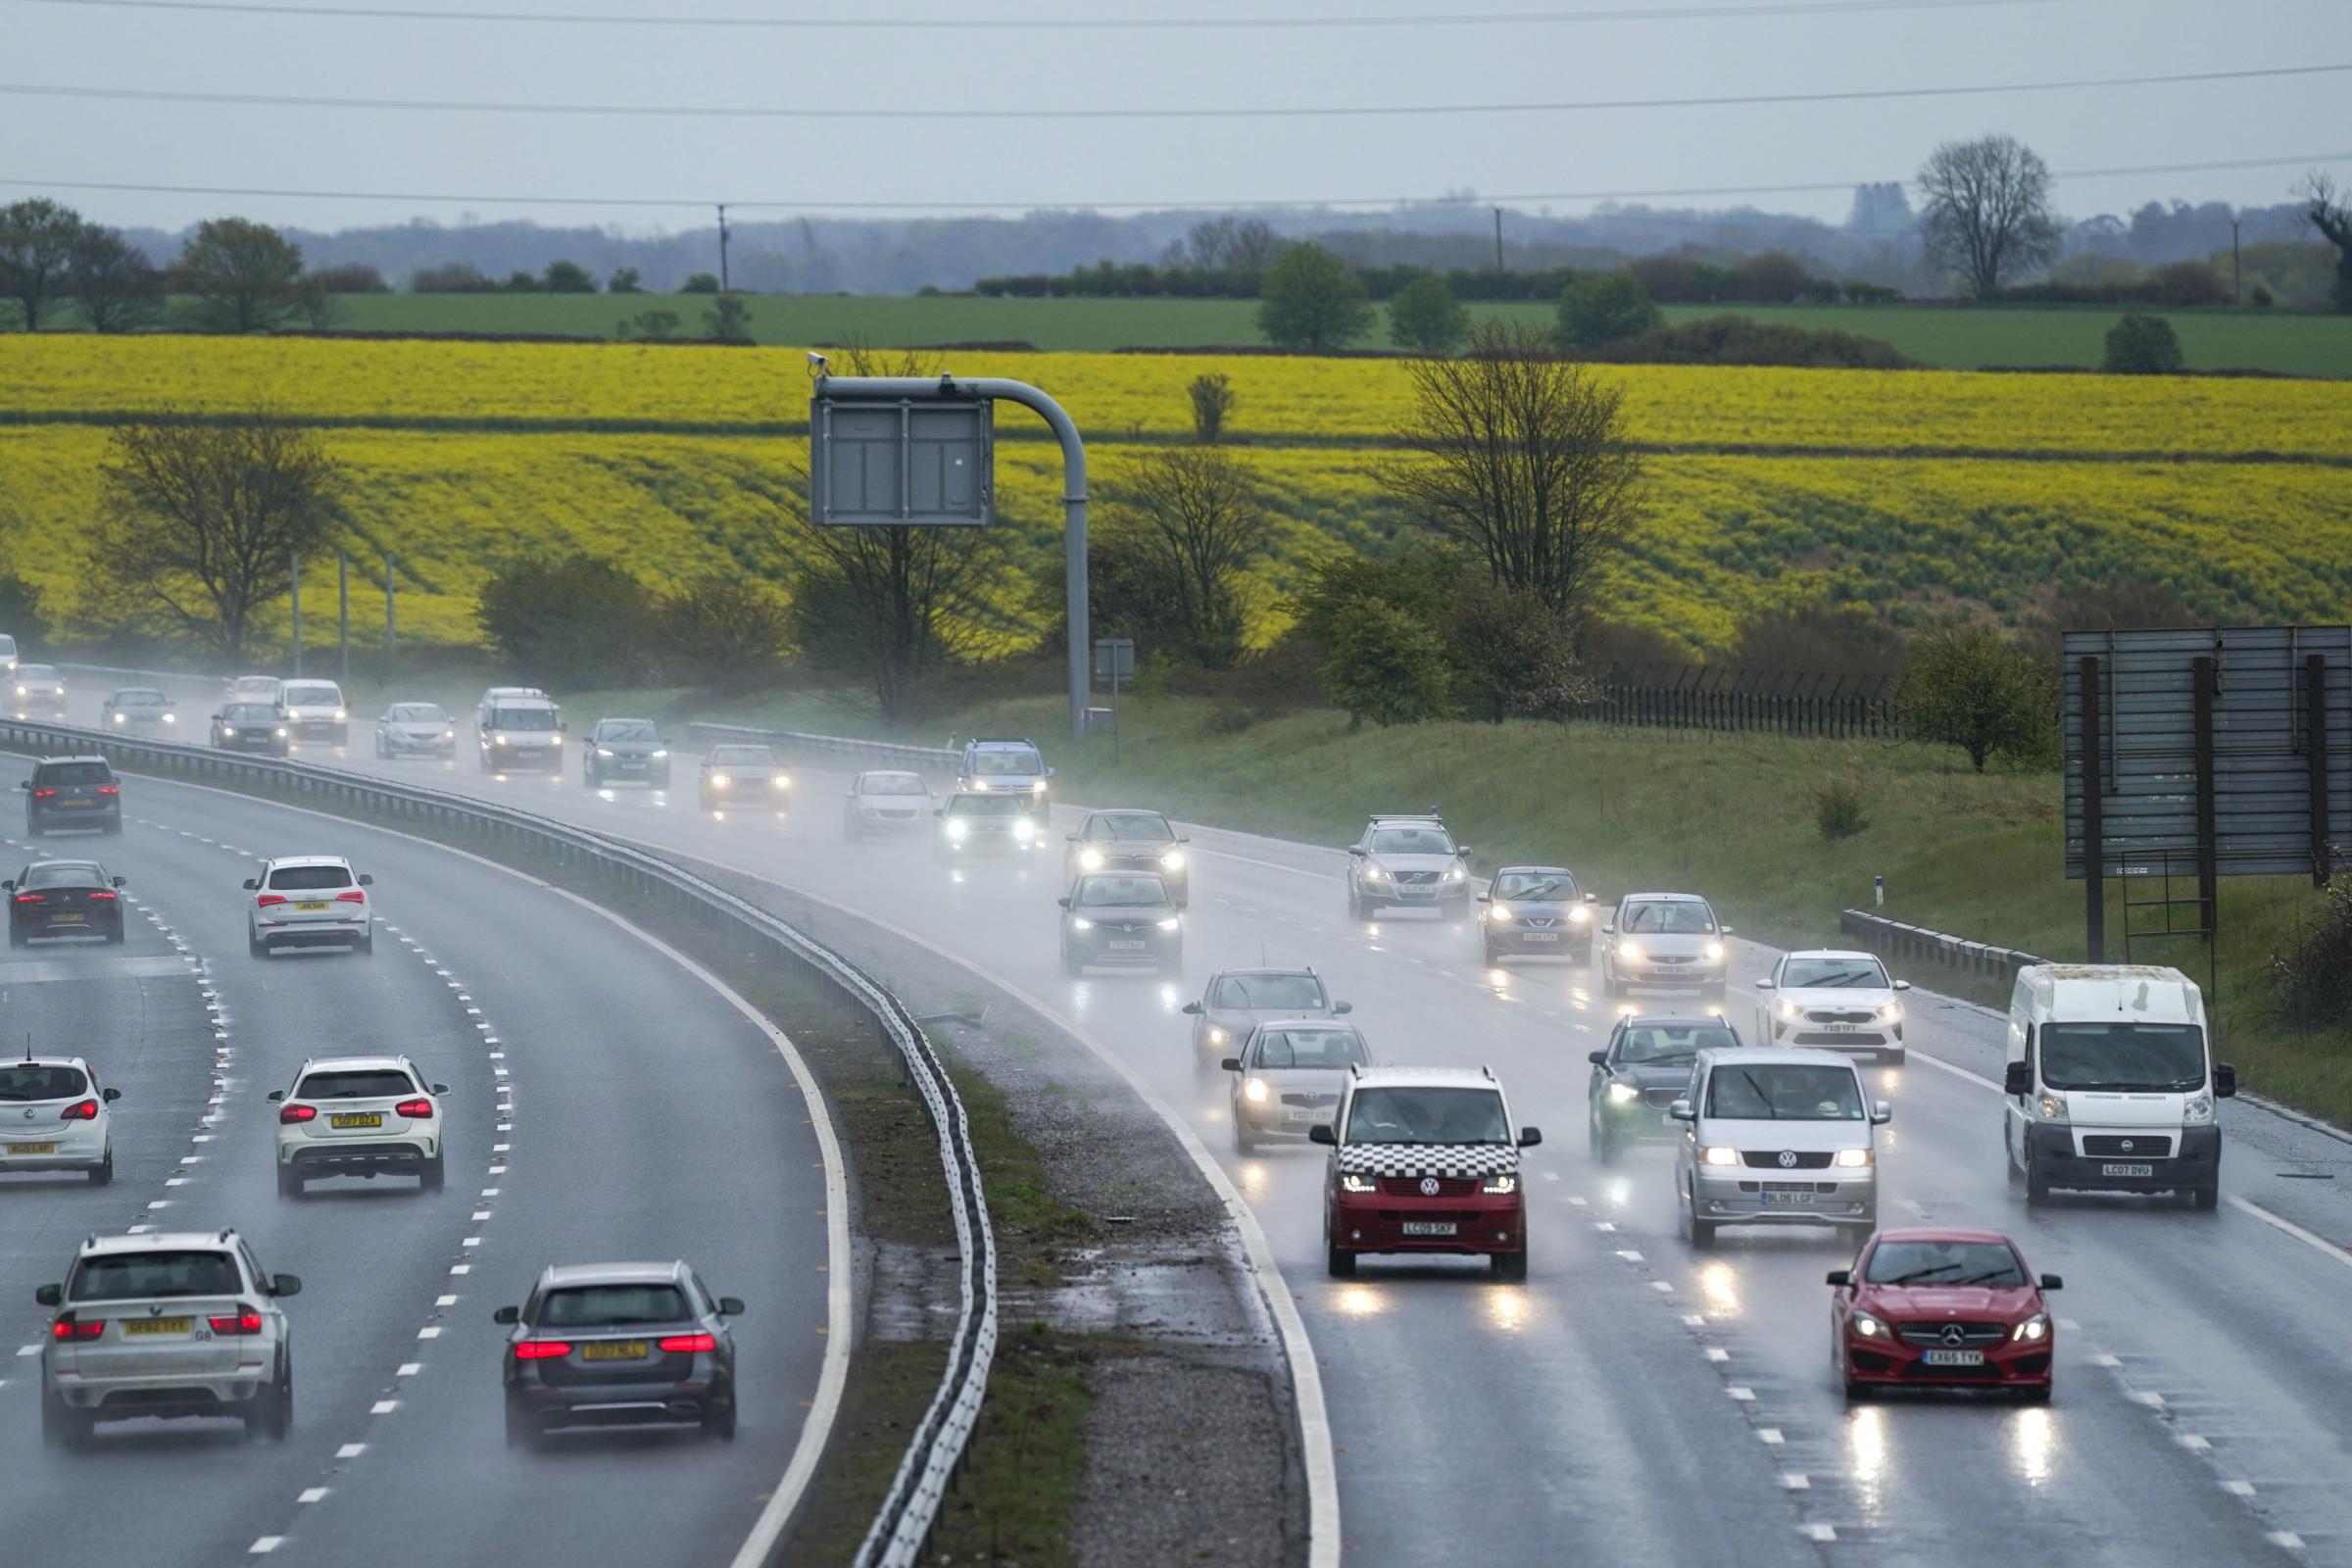 Vehicles travel along the M4 motorway near Bath on Bank Holiday Monday, as strong winds are expected to sweep eastwards across Wales and the south of England from midday on Monday to 9am on Tuesday. Picture date: Monday May 3, 2021. PA Photo. See PA